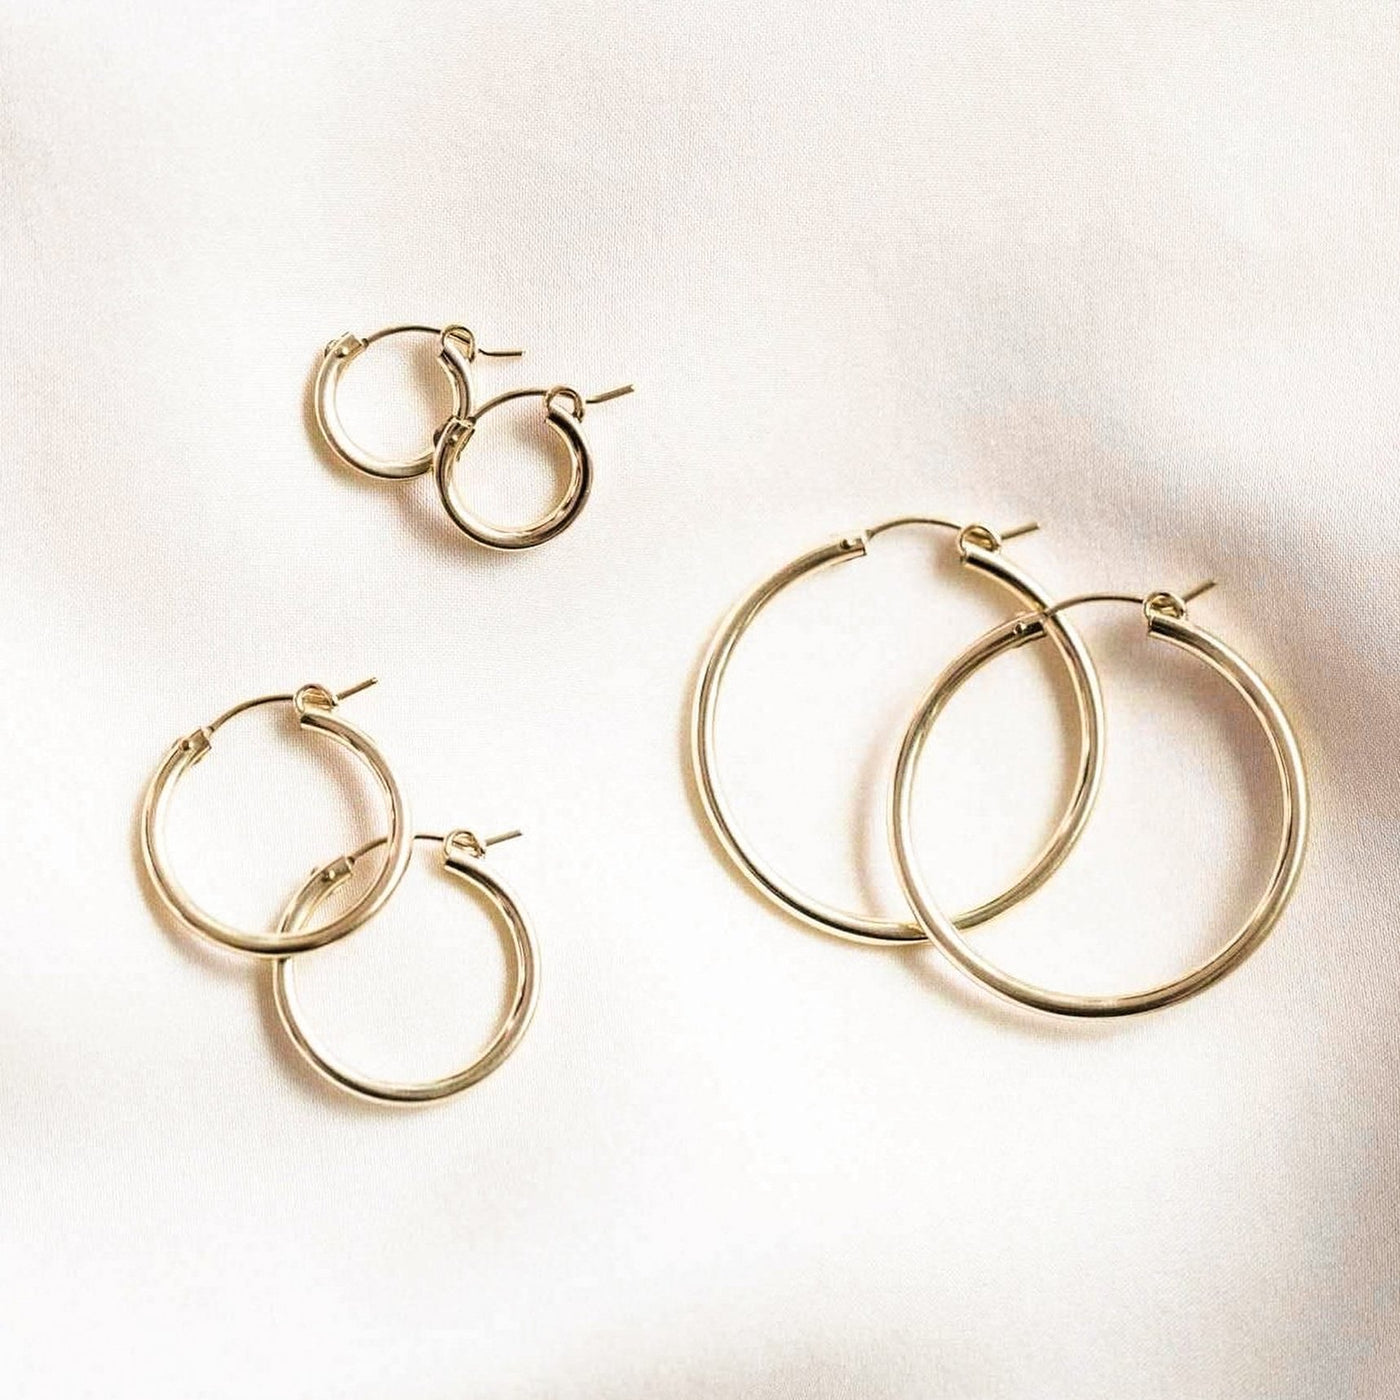 Small (13mm) Medium (22mm) Large (35mm) X-Large (50mm), Everyday Hoop Earrings by Simple & Dainty Jewelry